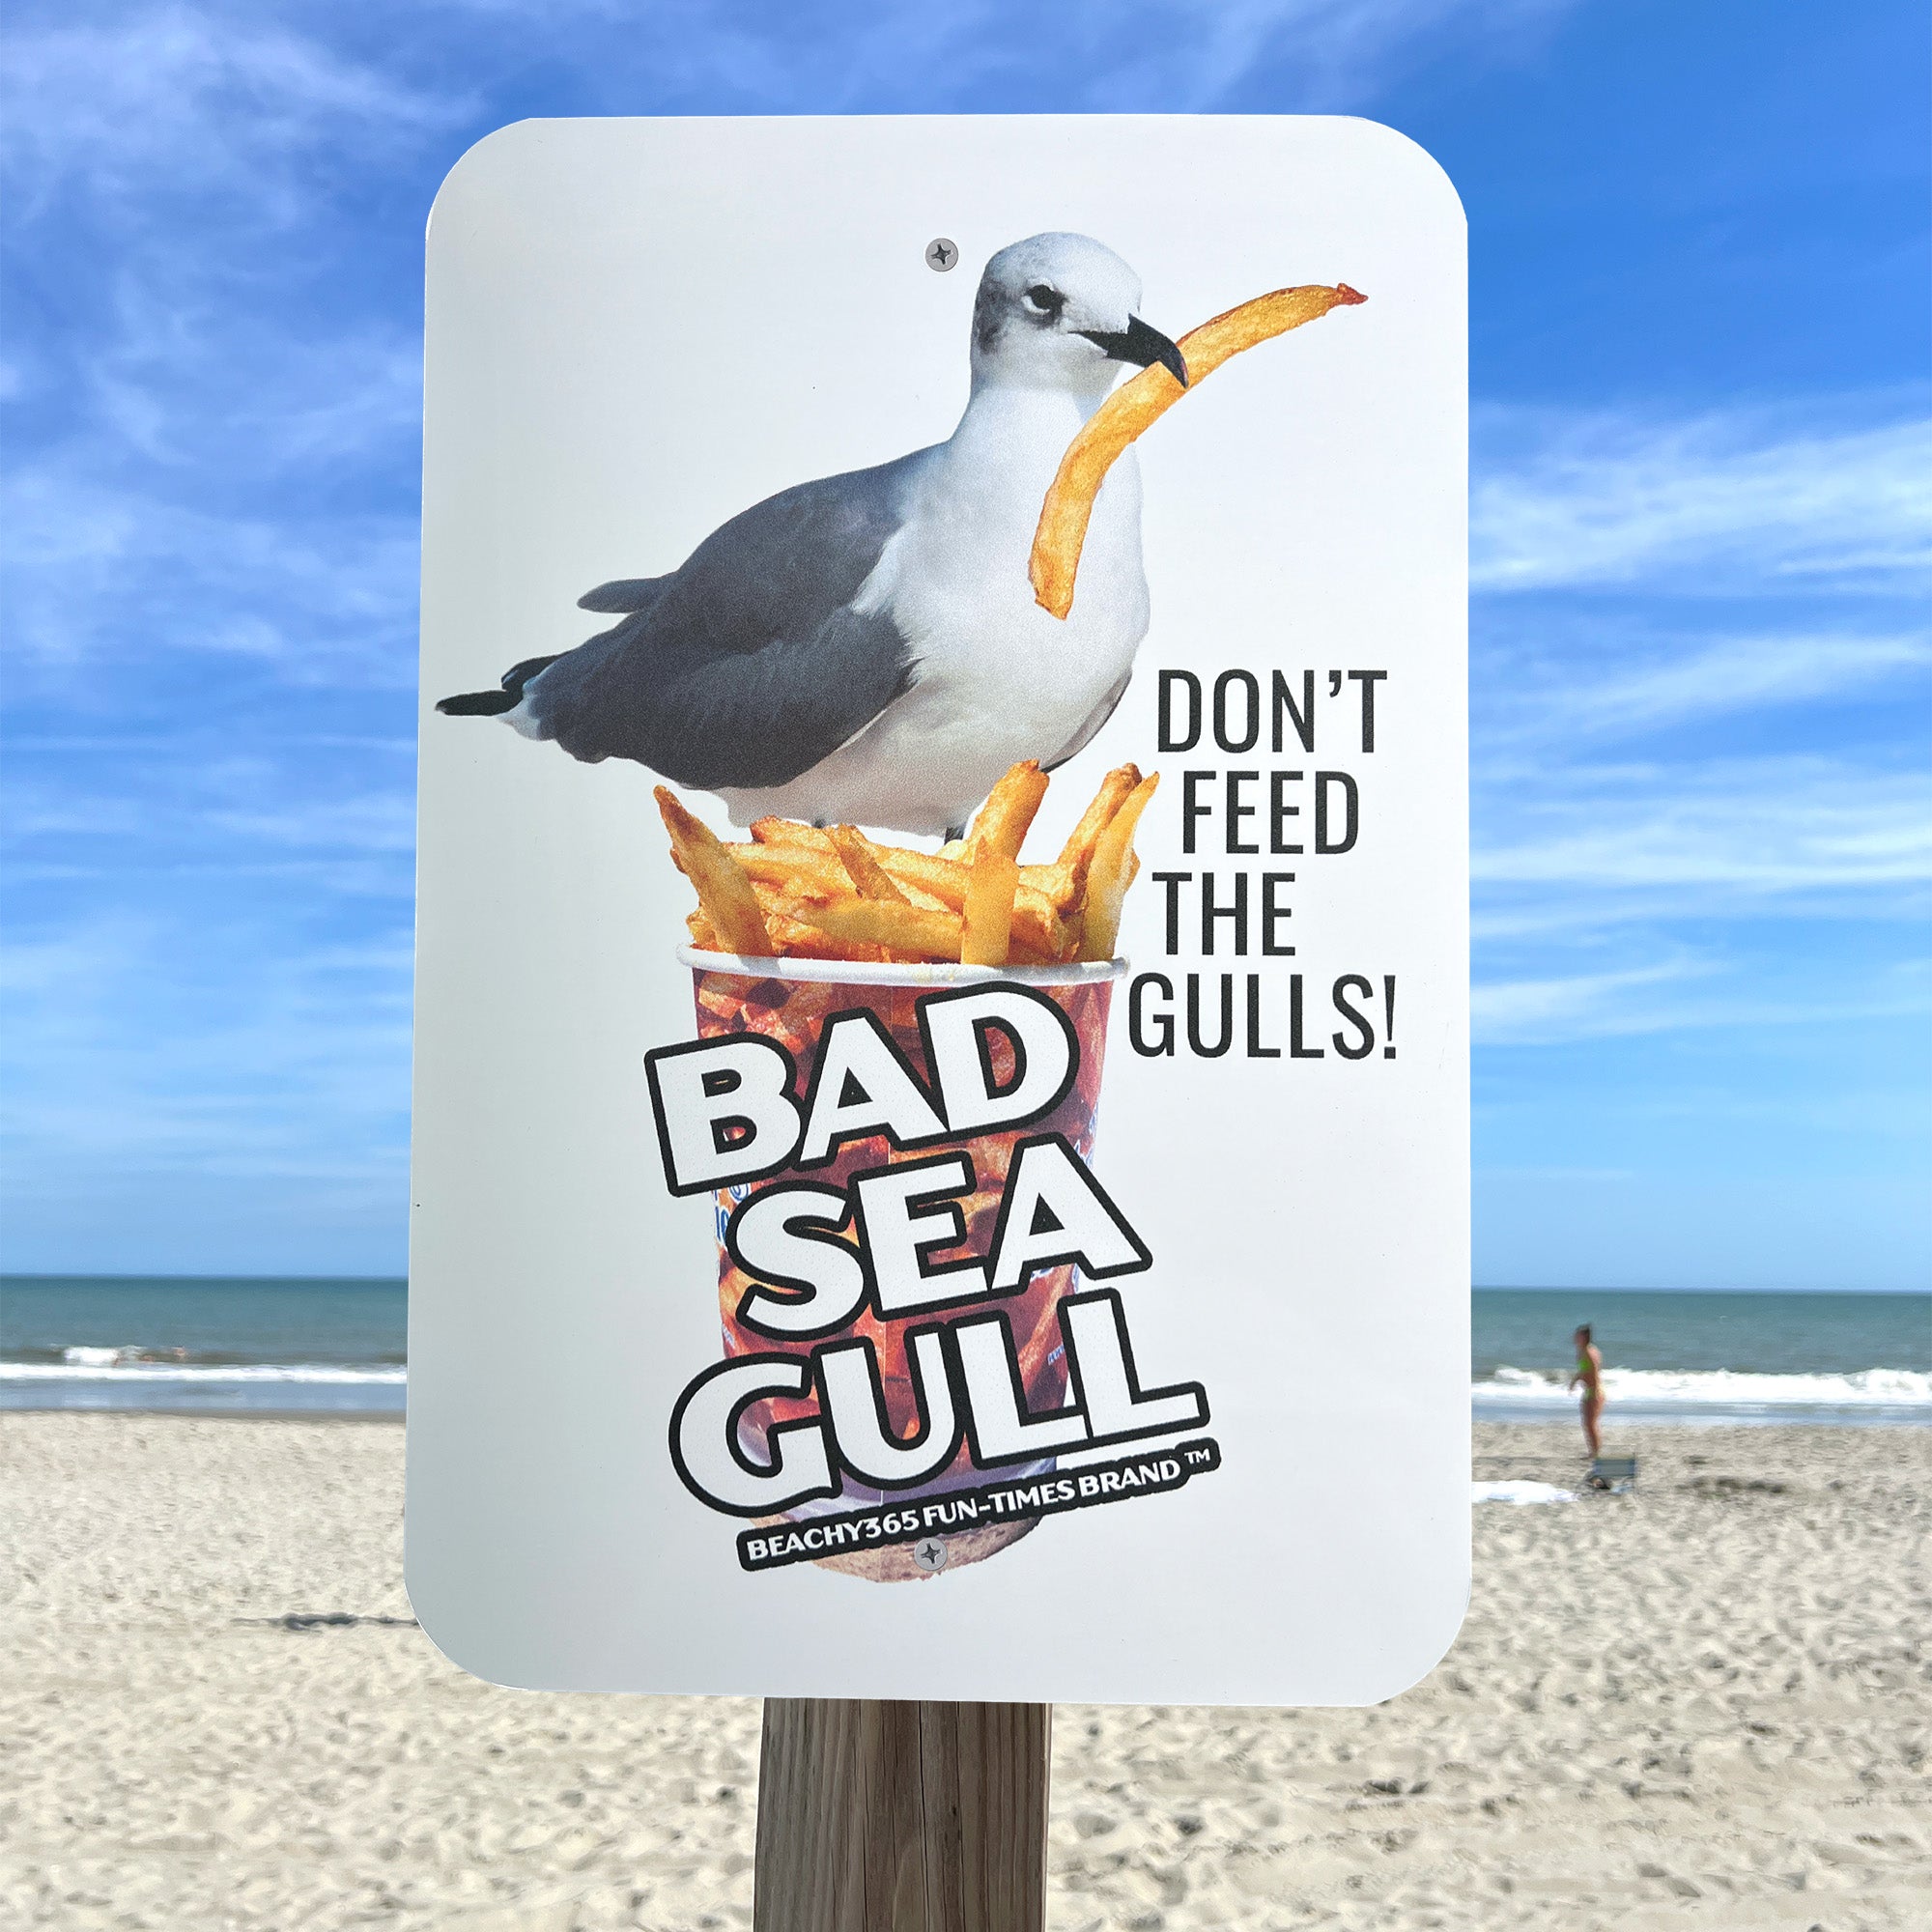 Bad Seagull - Don't Feed the Gulls 18" x 12" Aluminum Sign